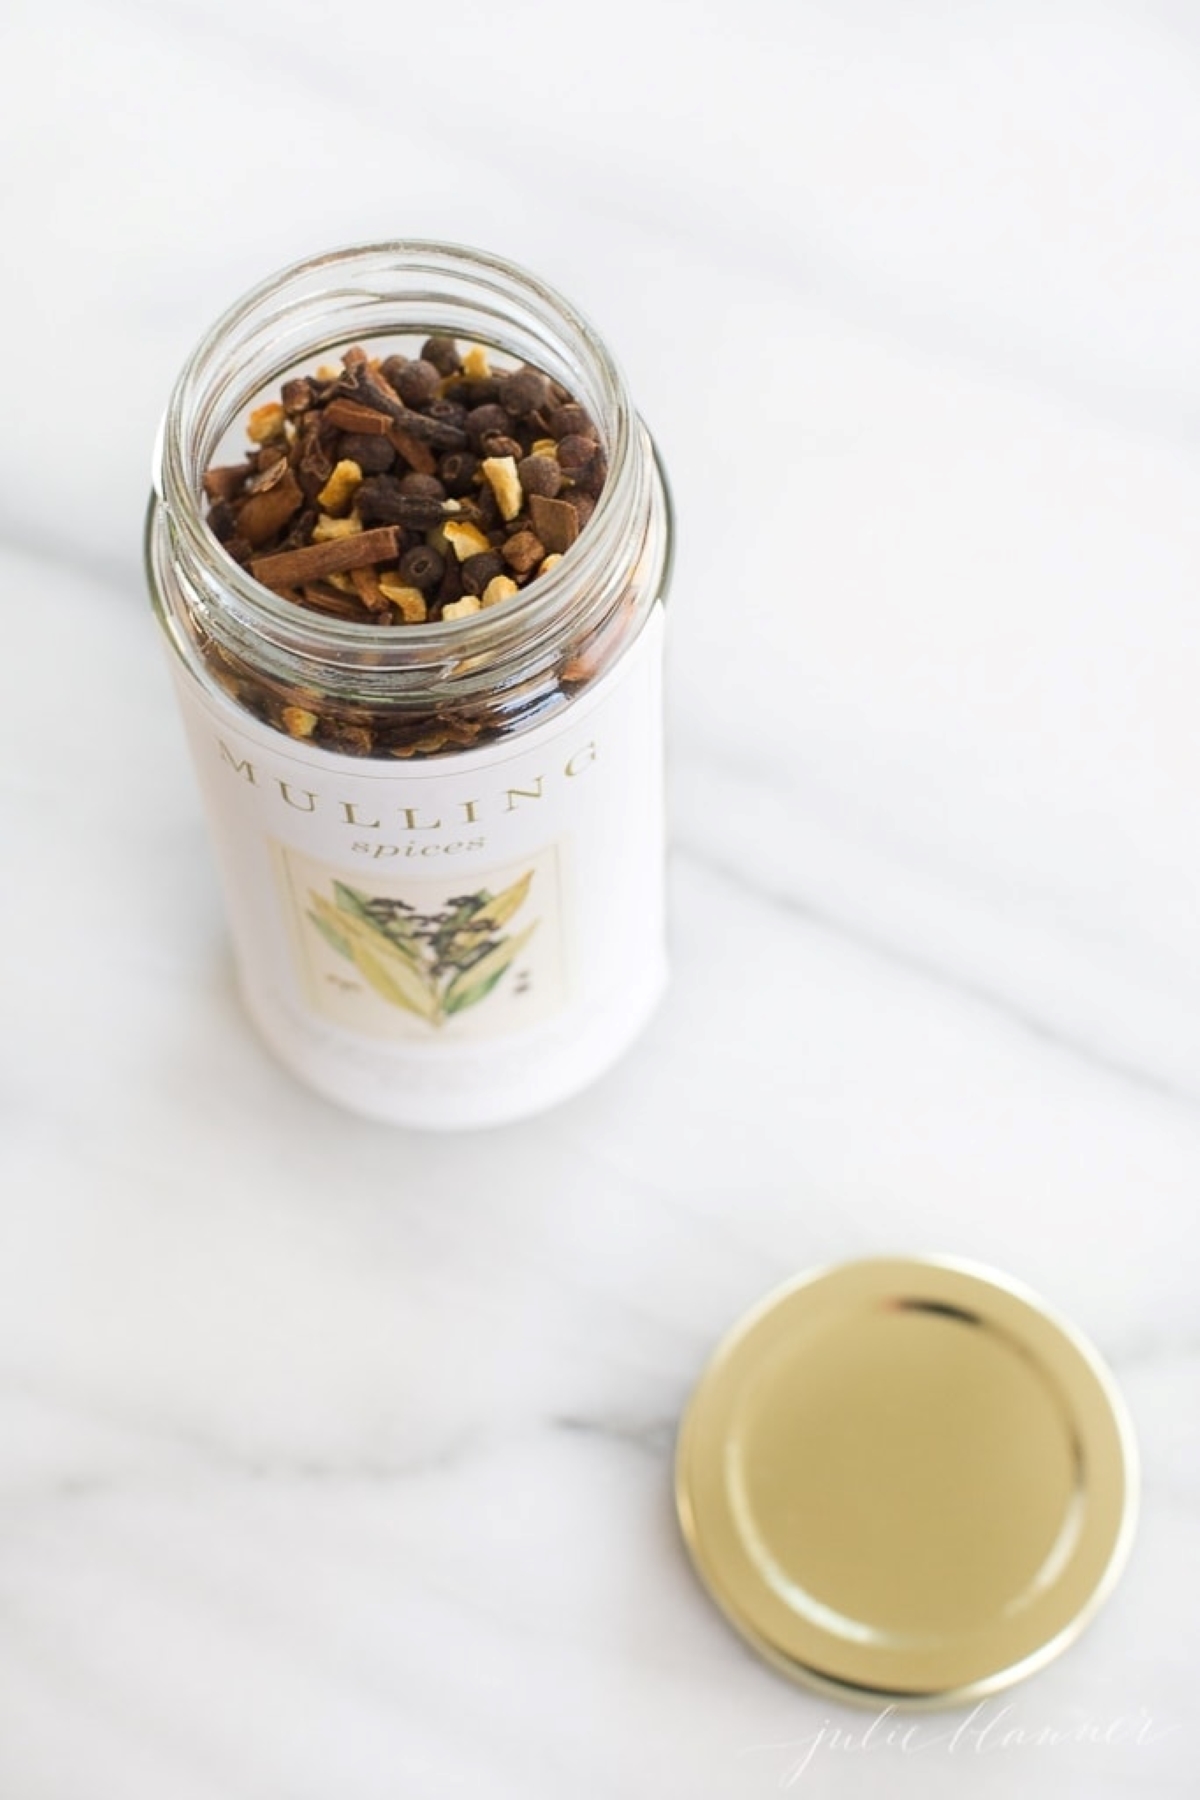 A bottle of mulling spices resting on a marble countertop, gold lid to the side.